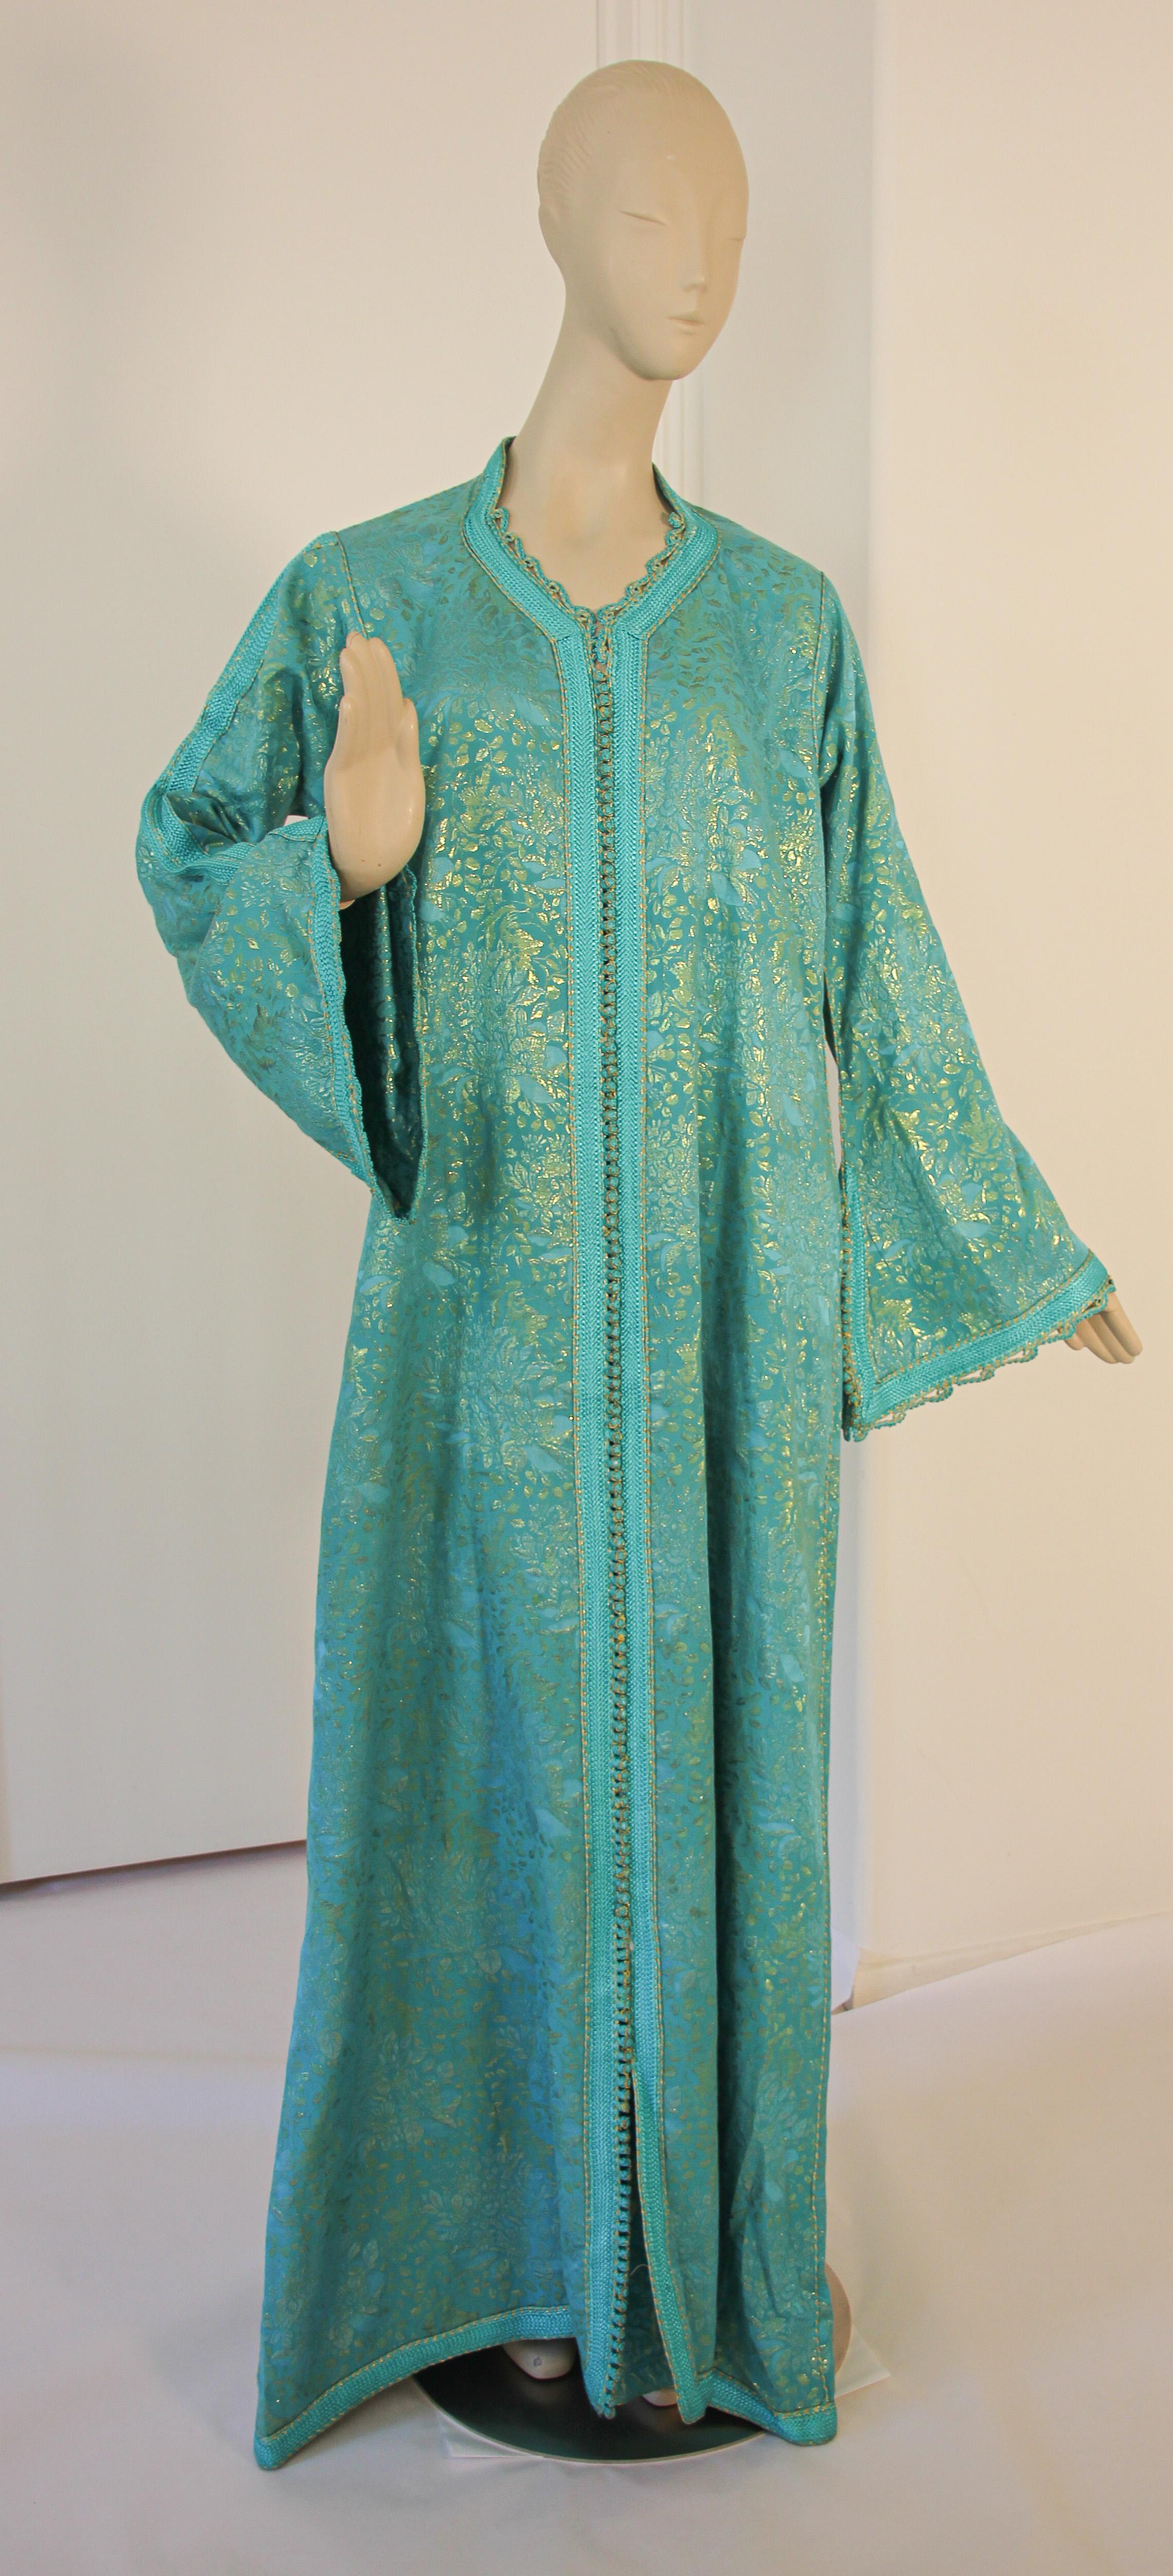 Stunning and elegant Moroccan caftan with metallic blue silk brocade.
handmade in Morocco and tailored for a relaxed fit with wide sleeves
This long maxi dress kaftan is embroidered and embellished entirely by hand.
The kaftan features a traditional